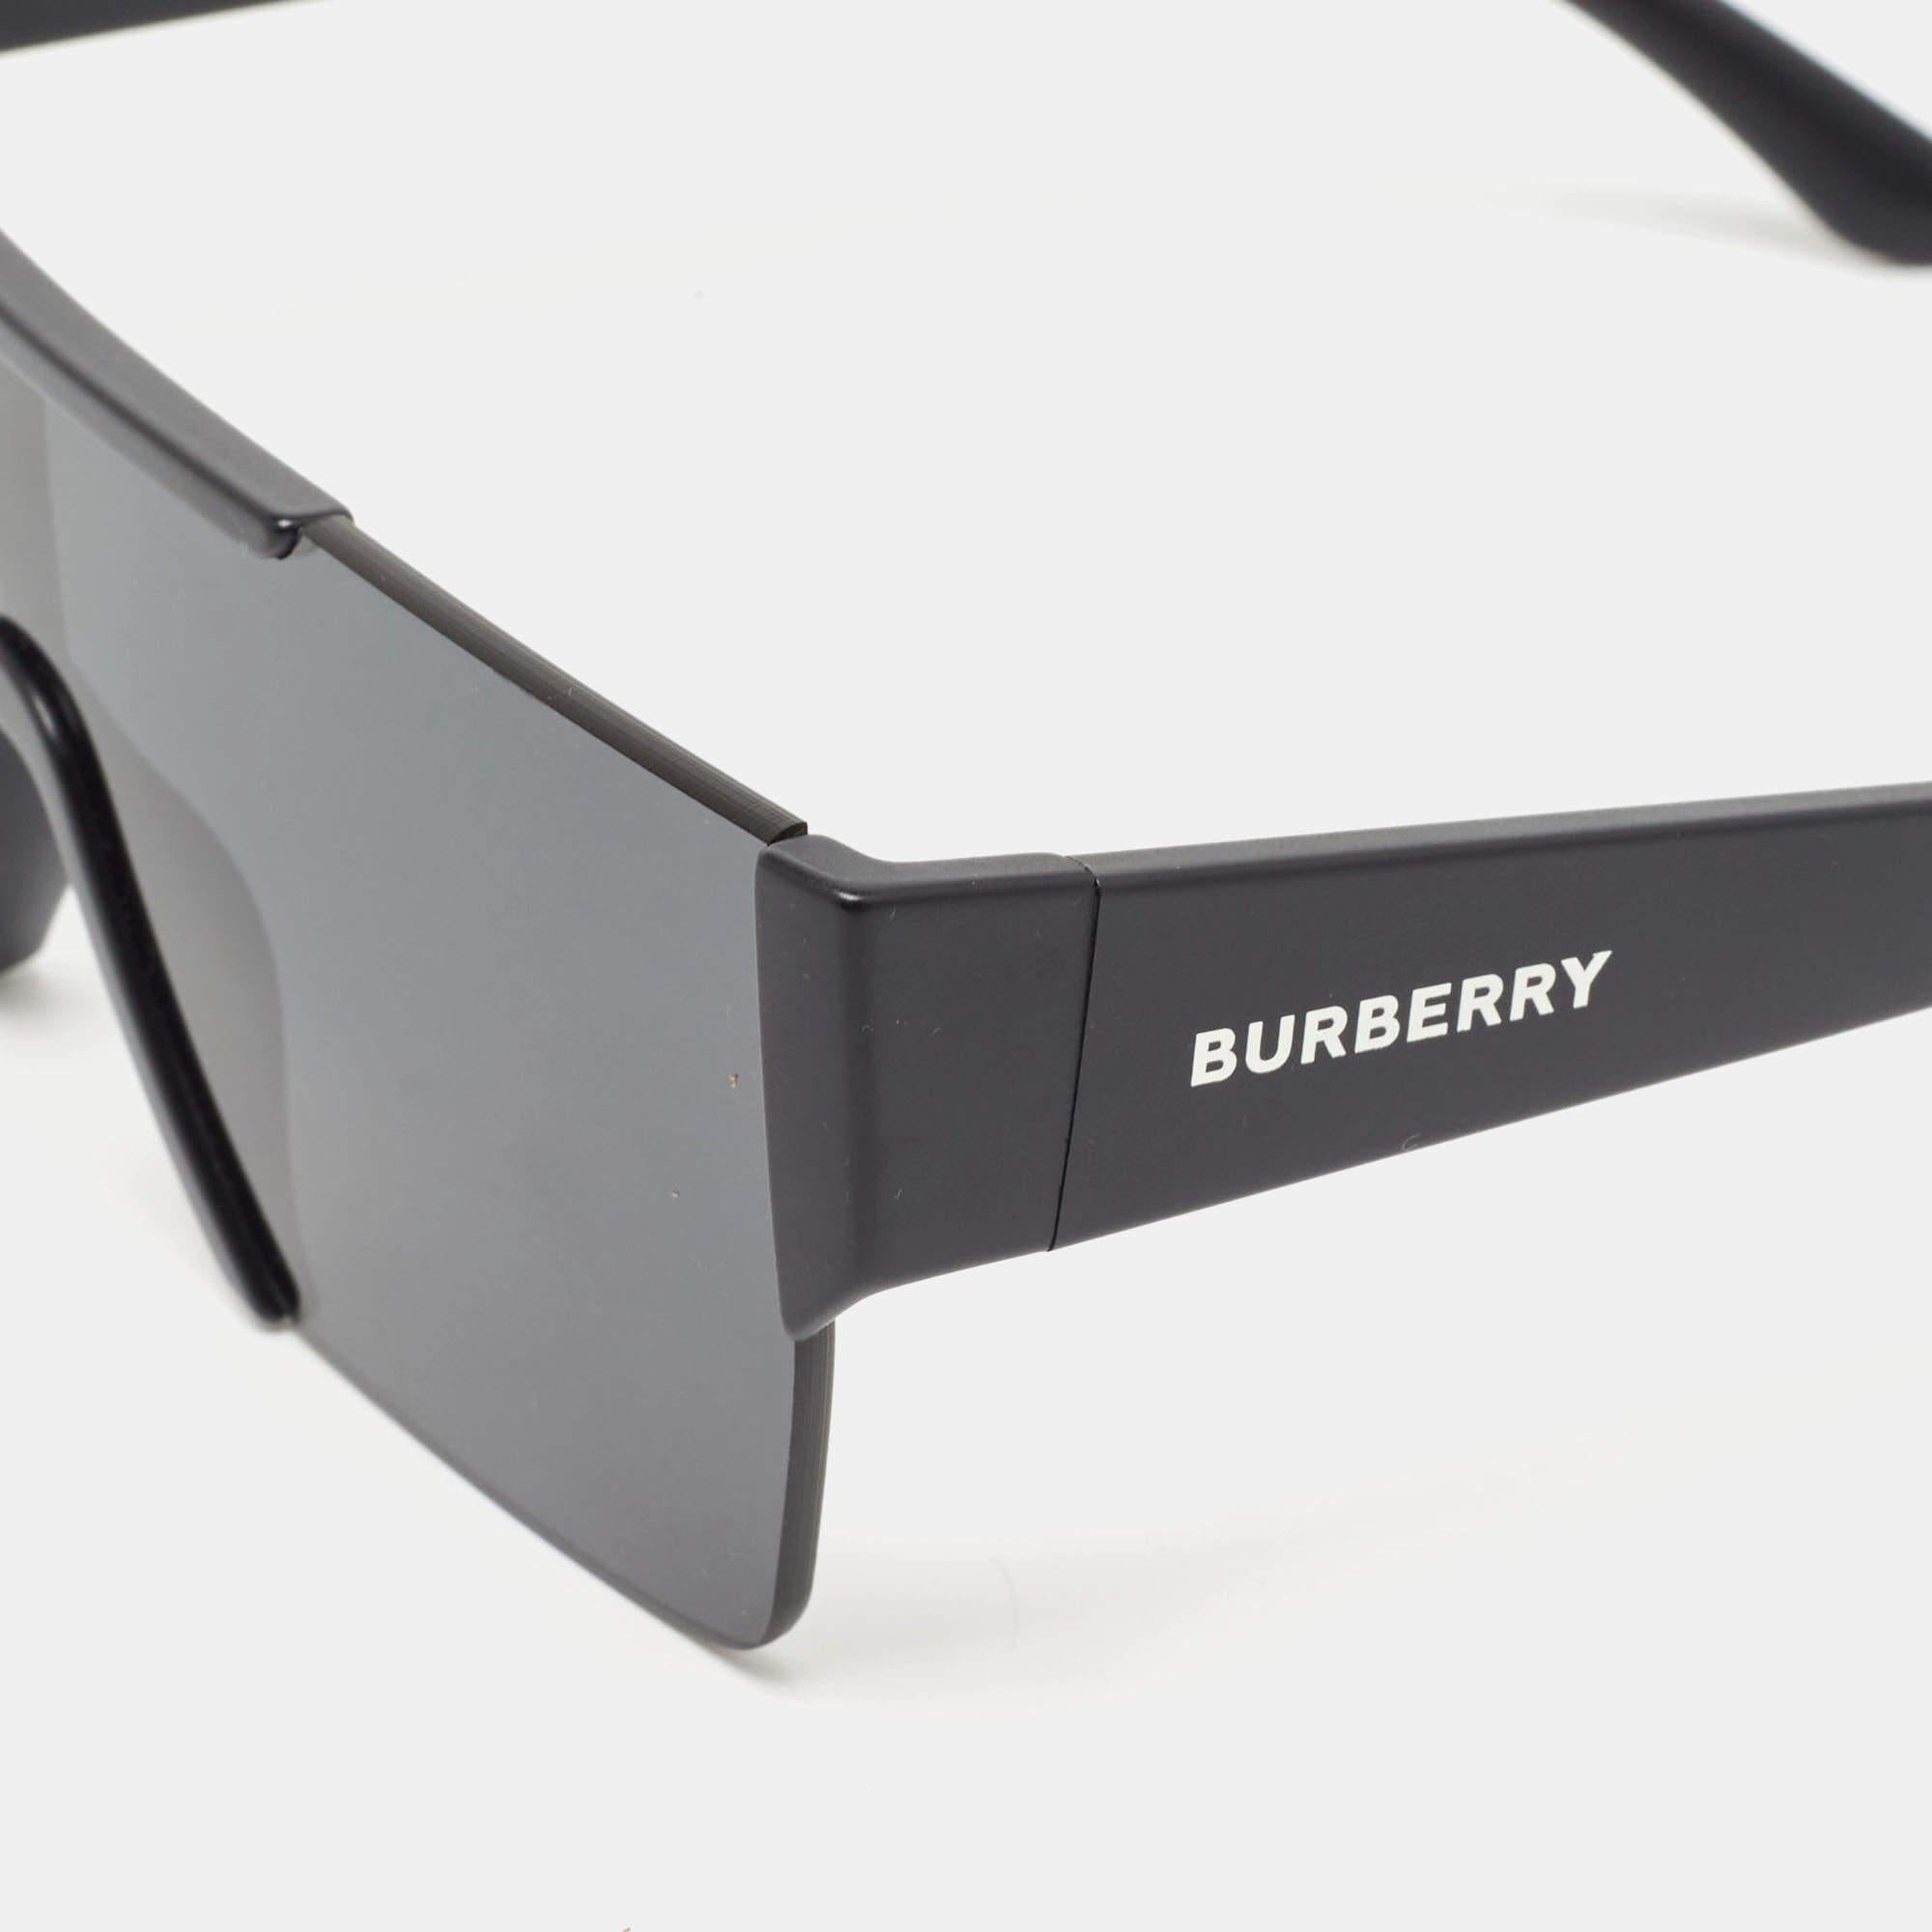 Created by Burberry, these designer sunglasses will be your best friend on any sunny day. It features a well-built frame, top-quality lenses, and signature accents. The pair will make a great buy.

Includes: Original Box, Info Booklet, Original